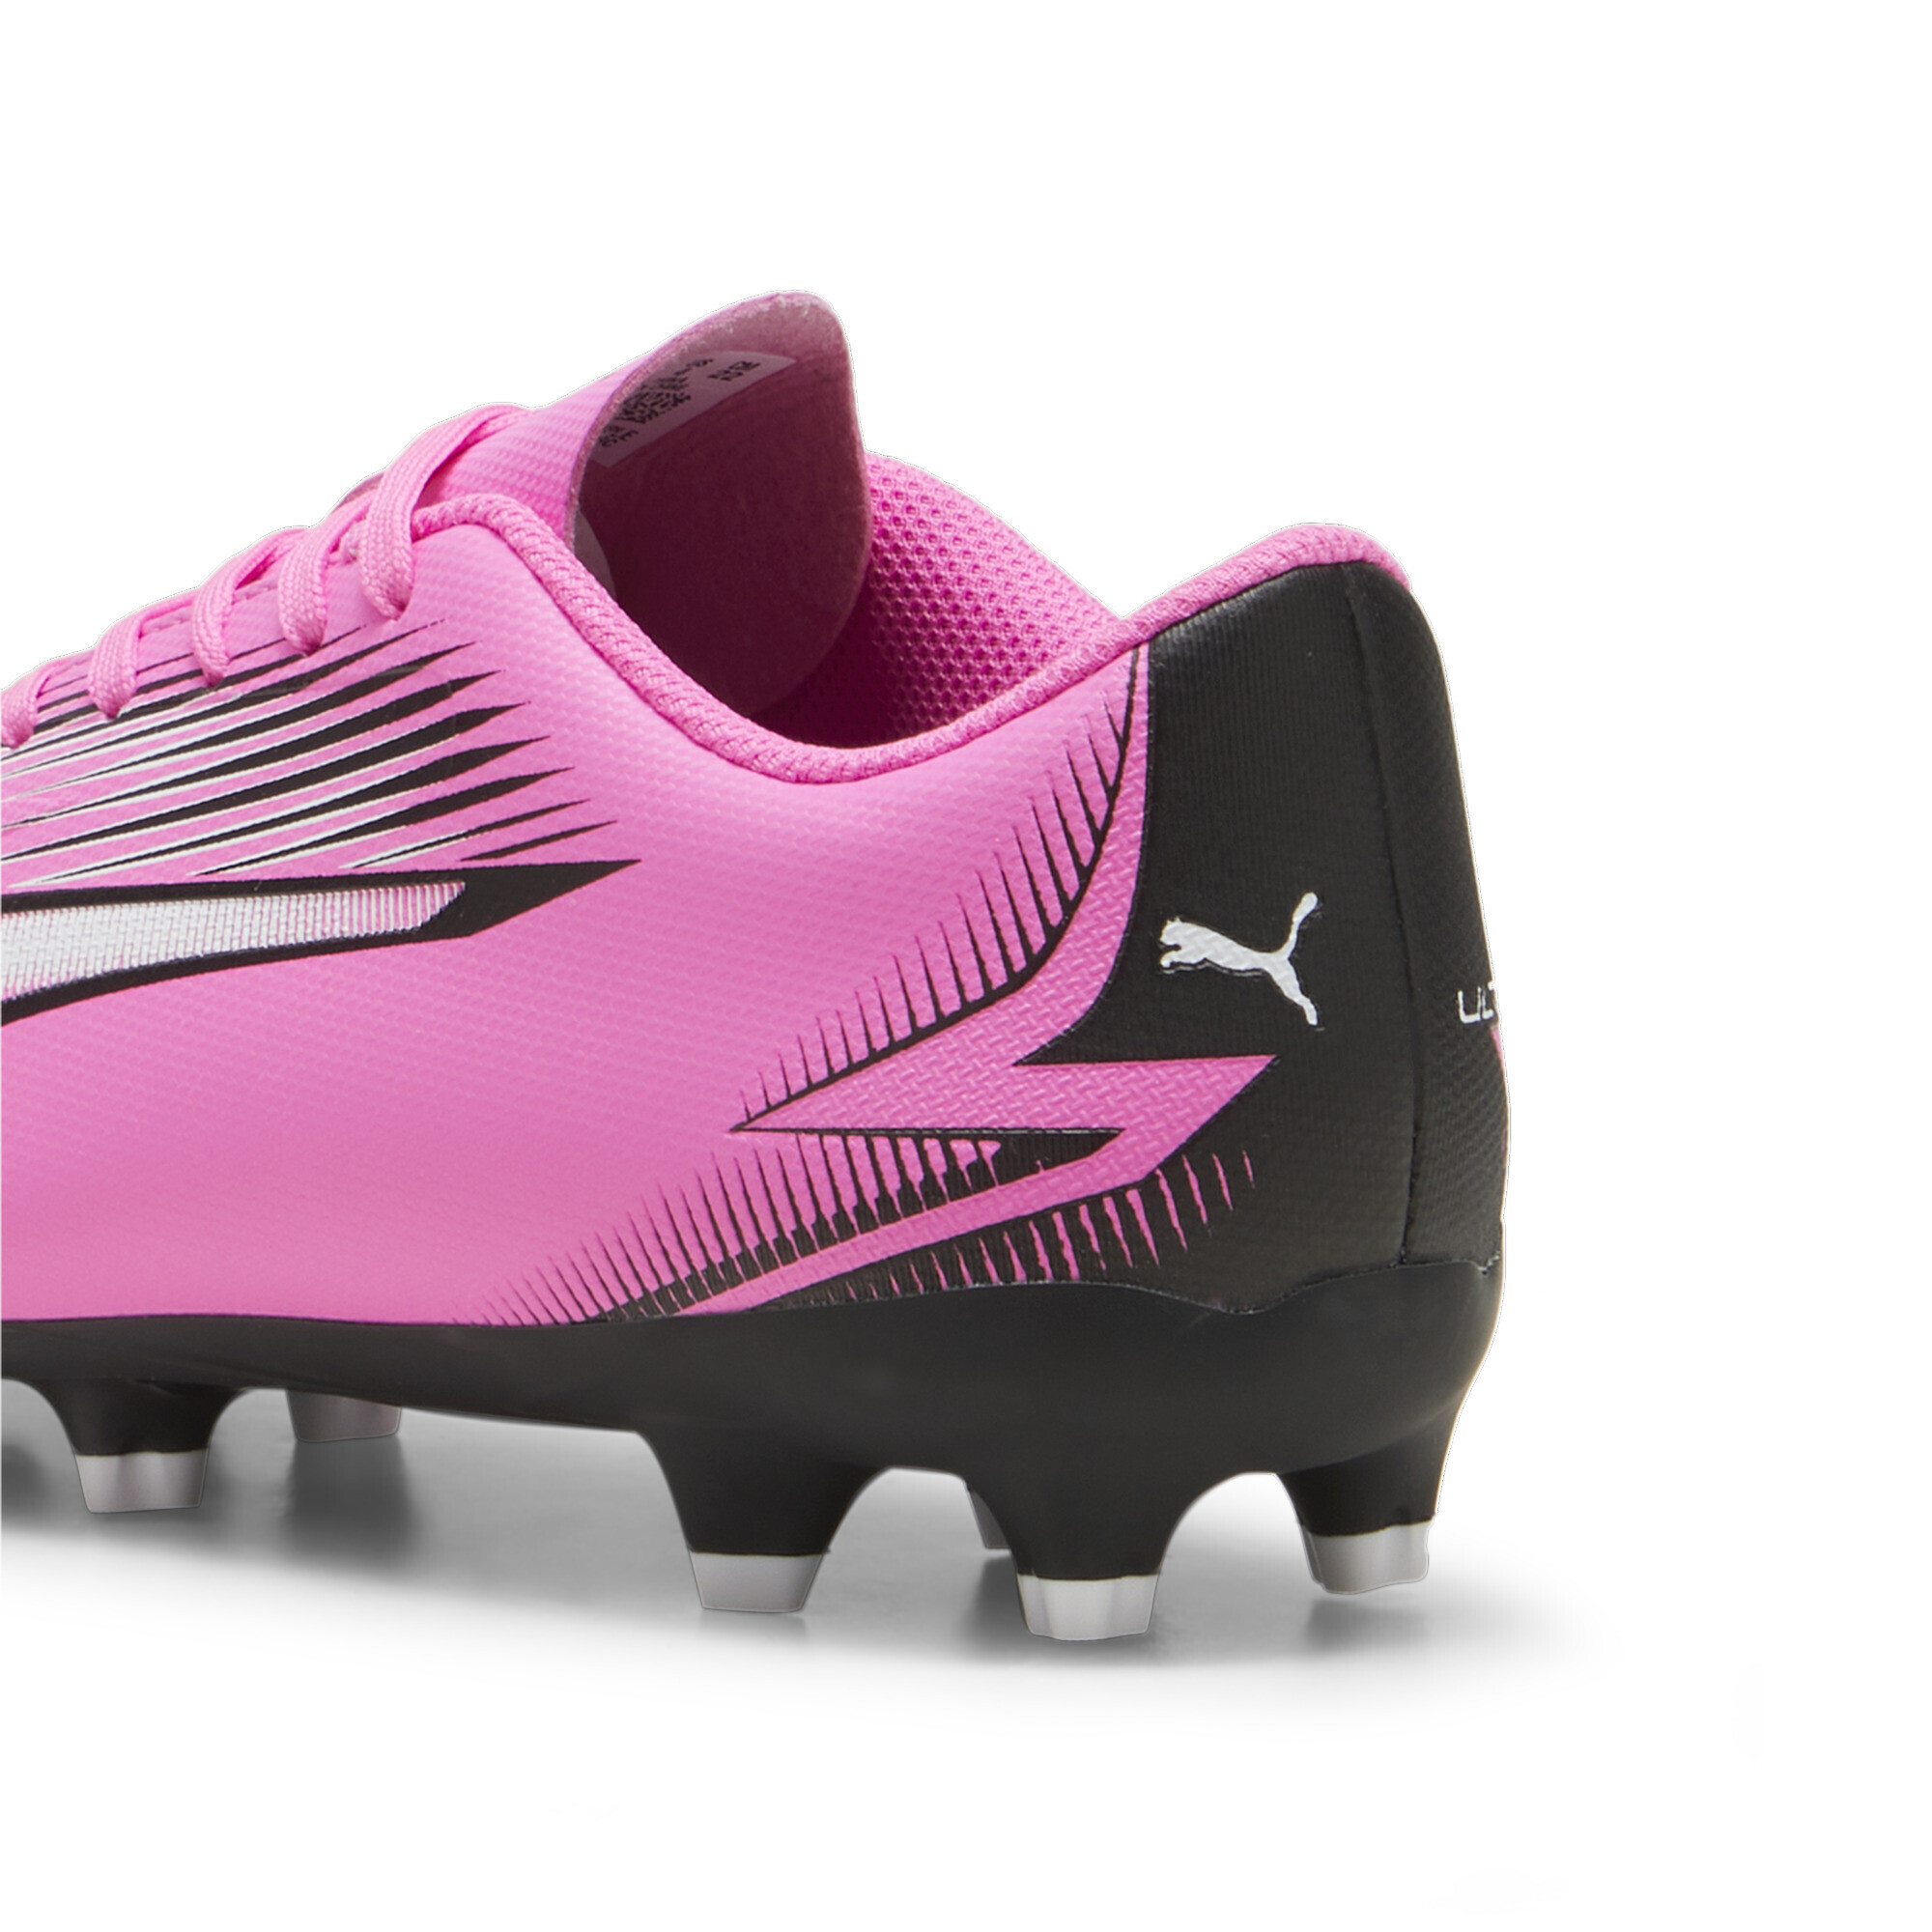 PUMA ULTRA PLAY FG/AG Youth Football Boots In Pink, Size EU 31.5